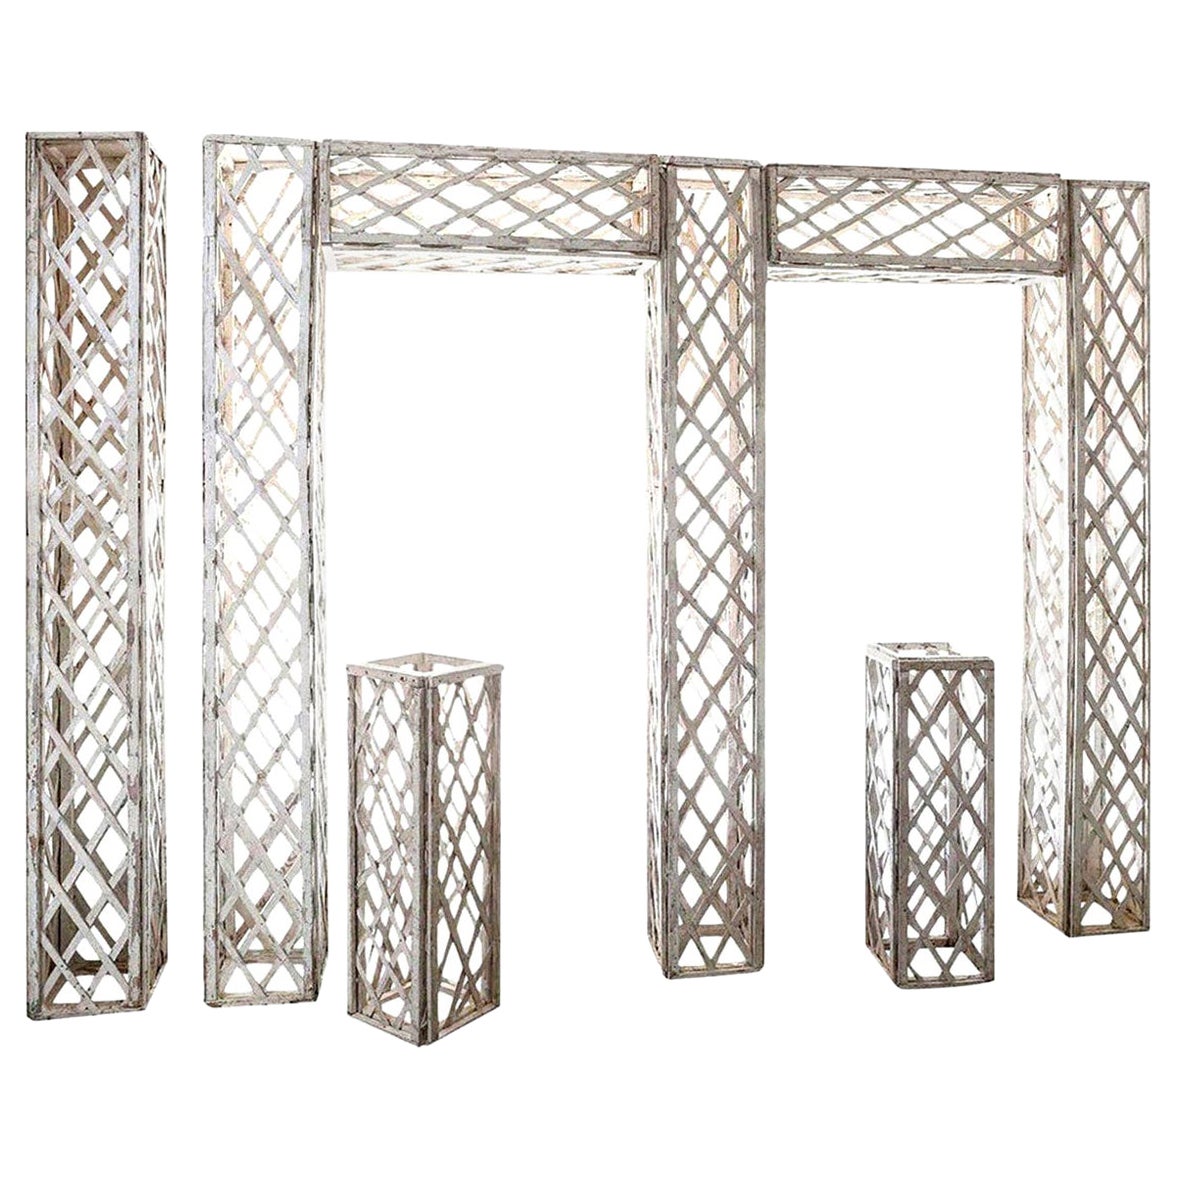 Vintage French White Painted Trellis For Sale